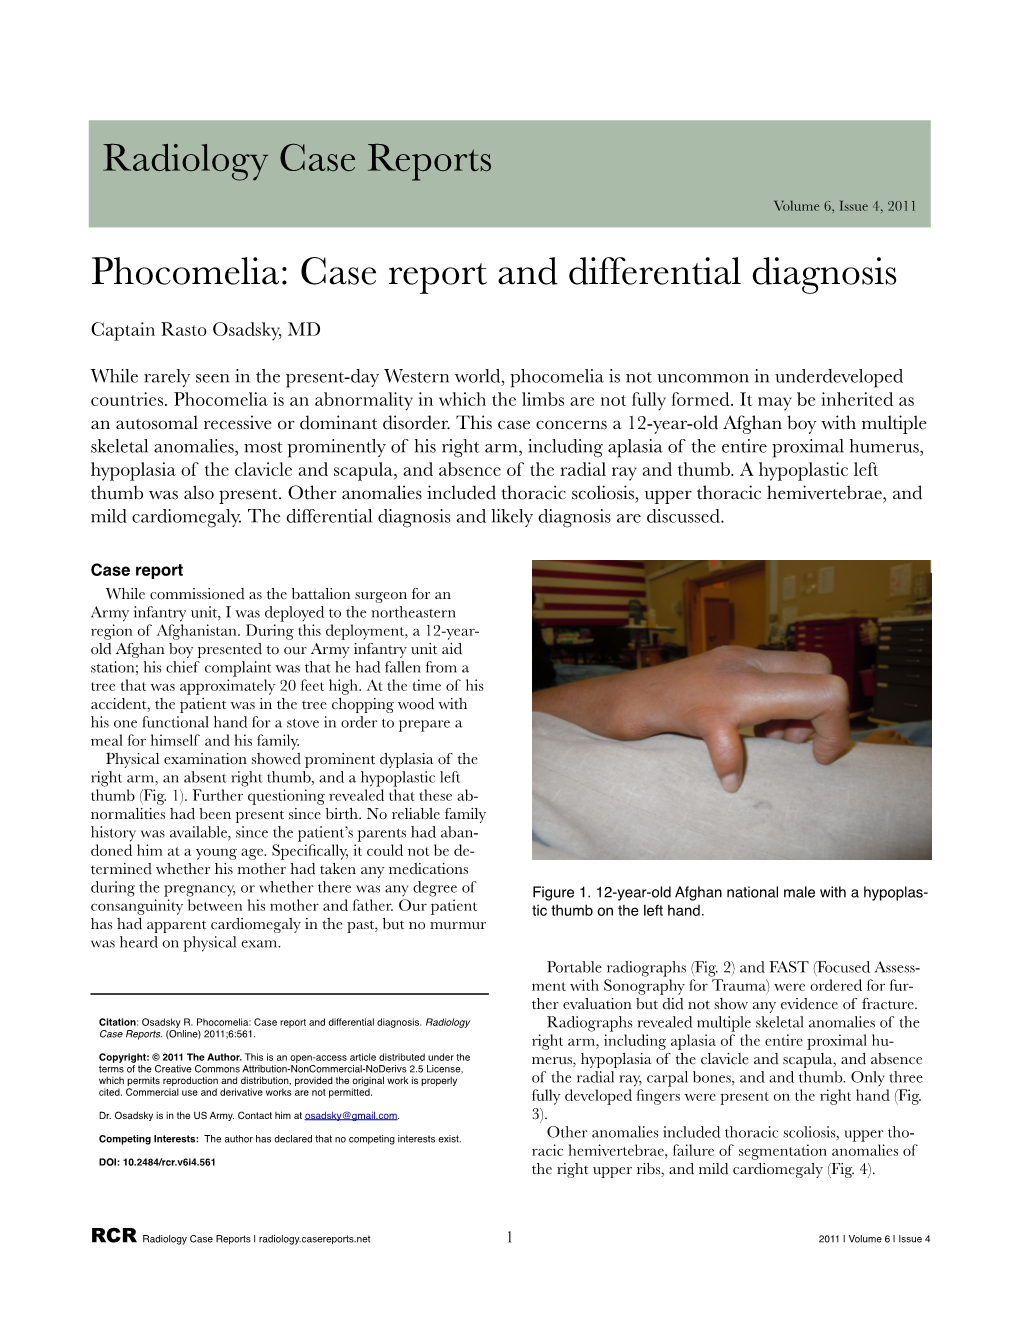 Phocomelia: Case Report and Differential Diagnosis